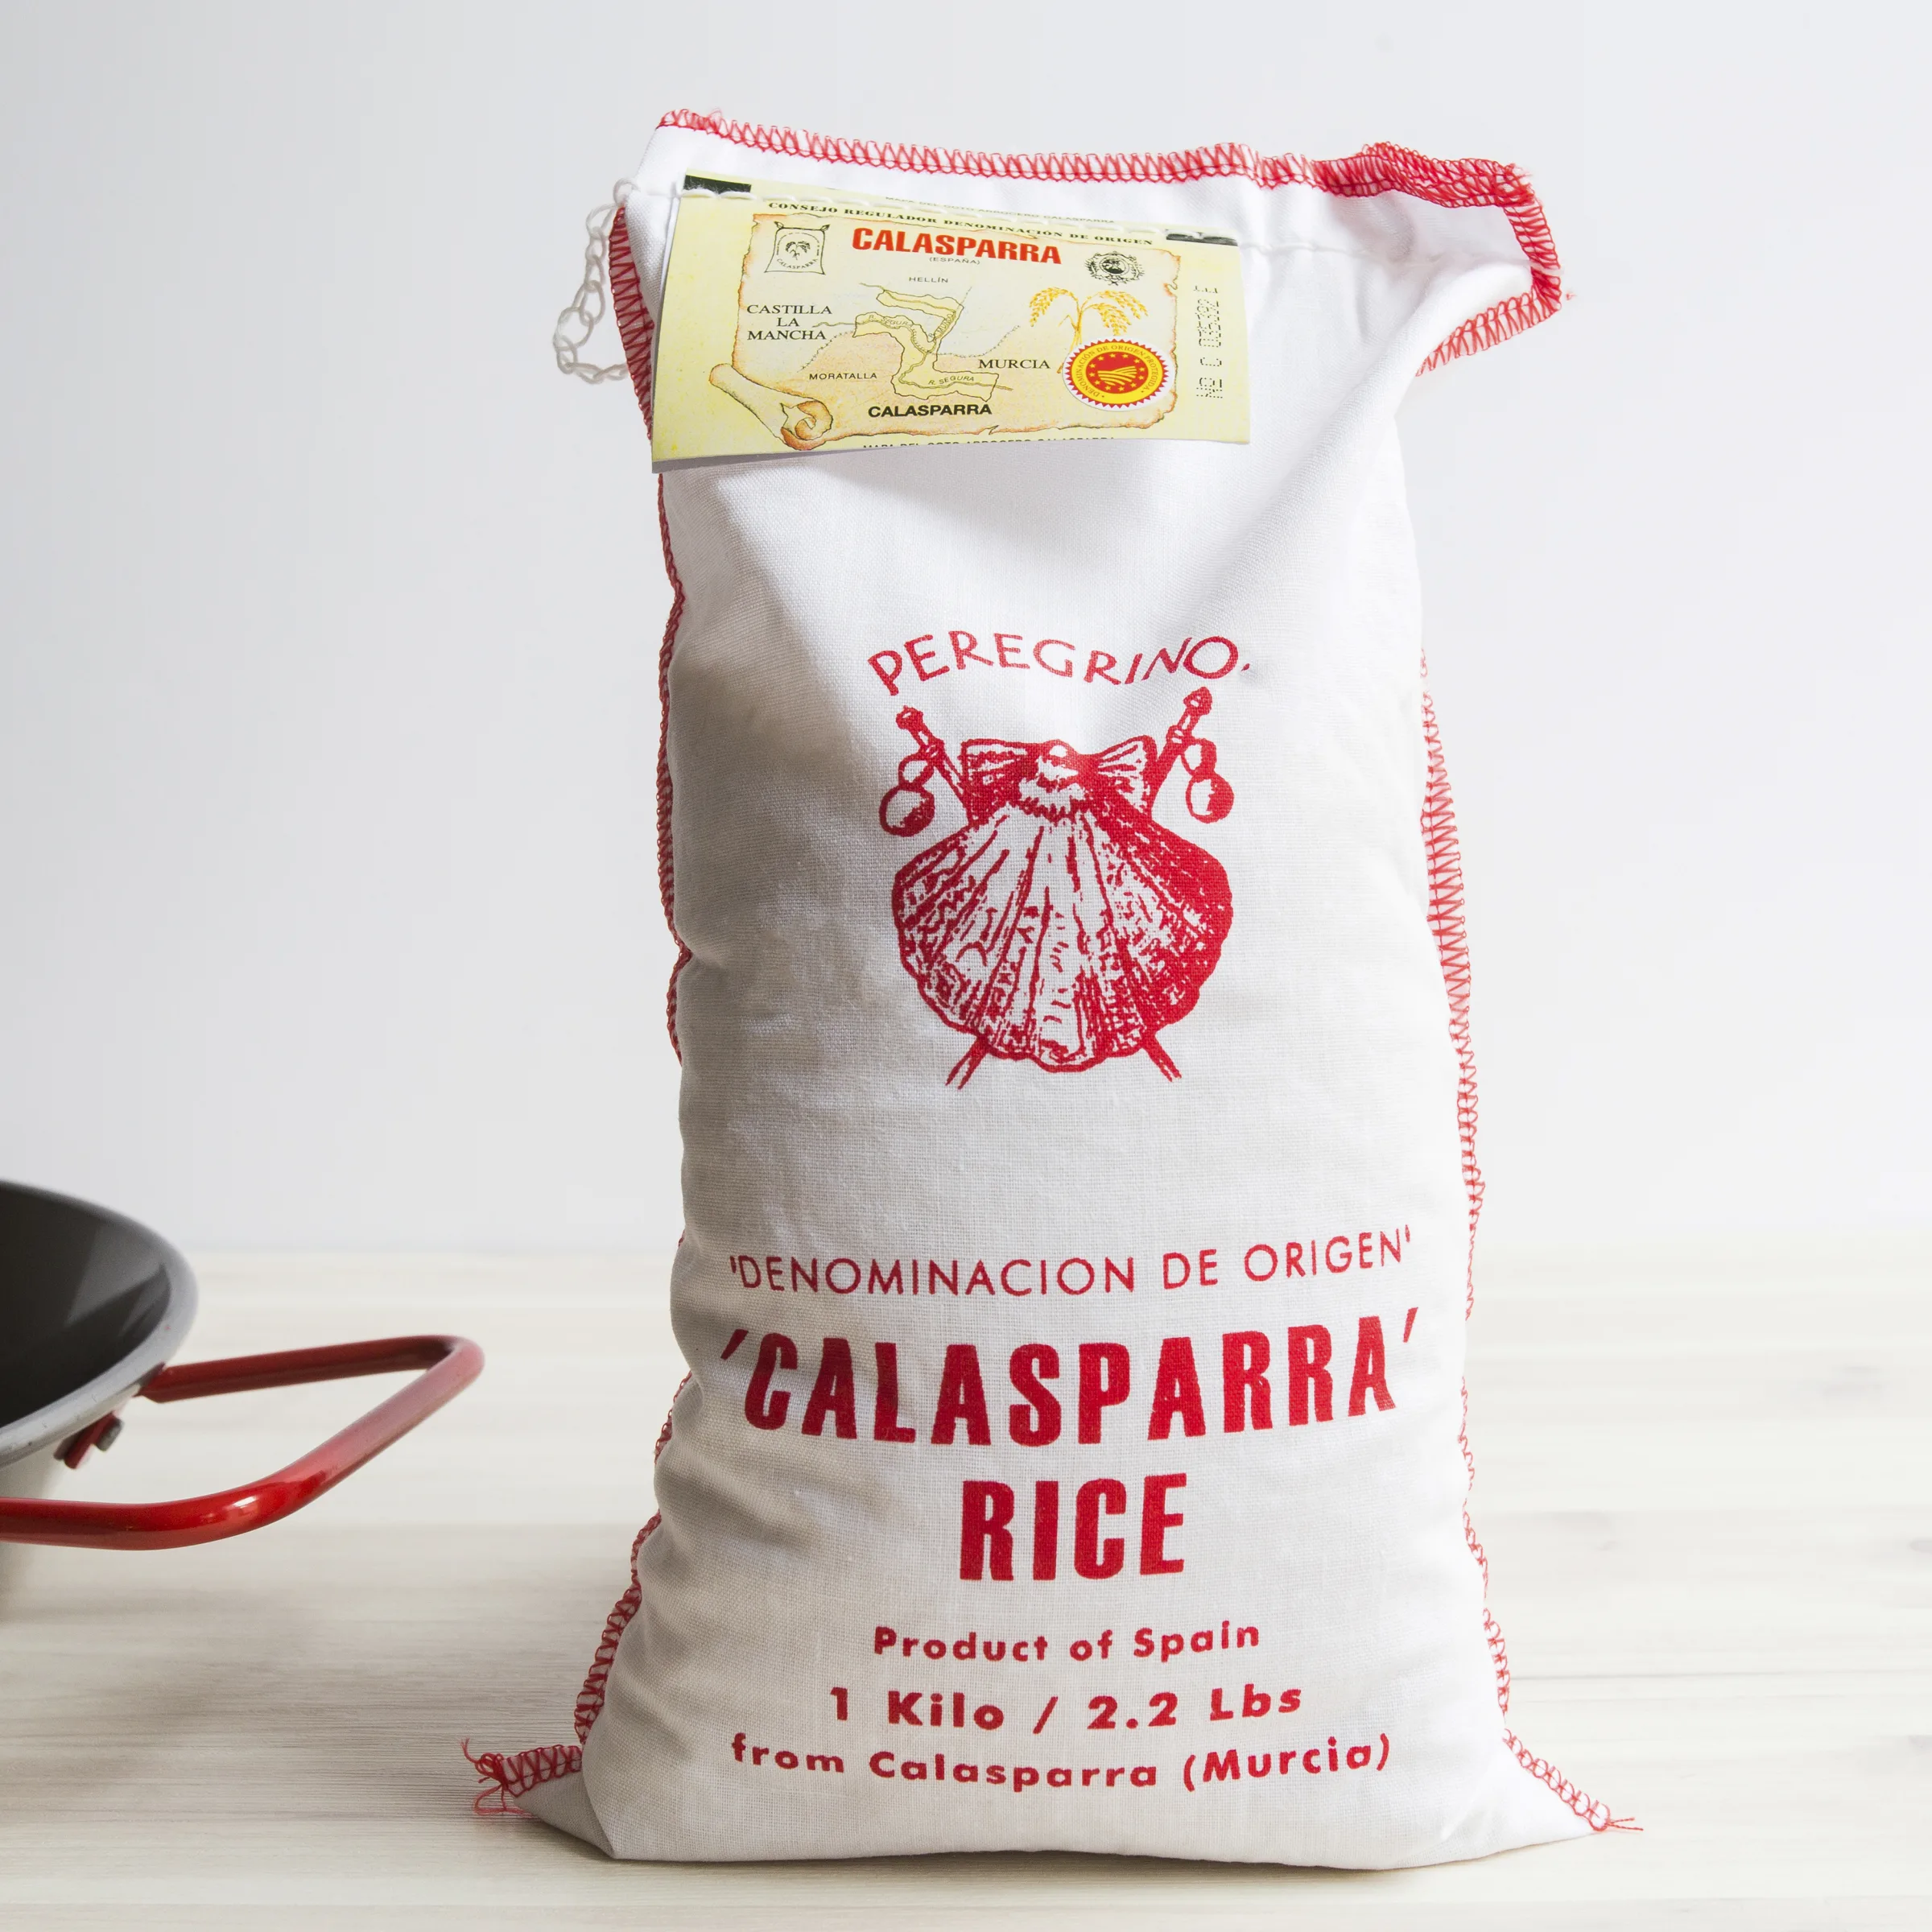 A large white hesson bag of caclasparra rice sits on a counter next to a paella pan